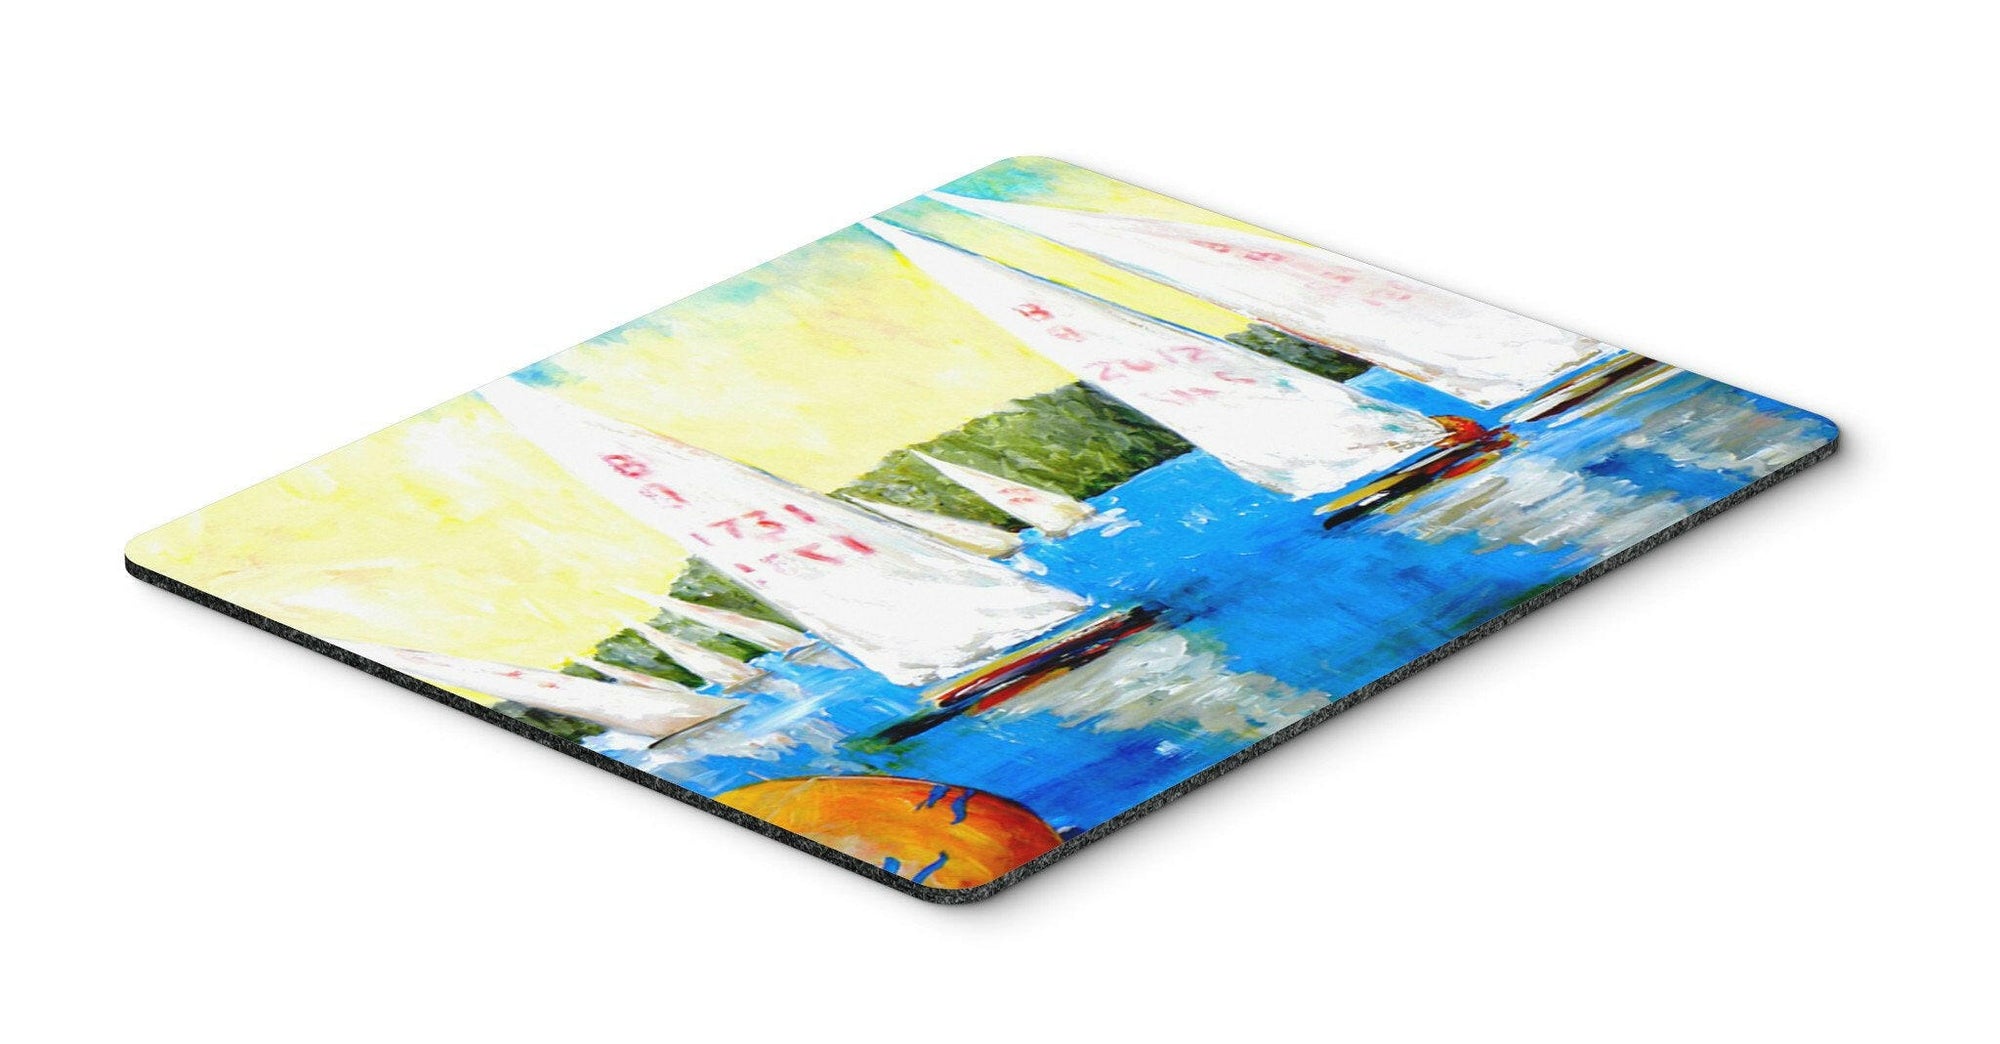 Sailboats Round the Mark Mouse Pad, Hot Pad or Trivet by Caroline's Treasures